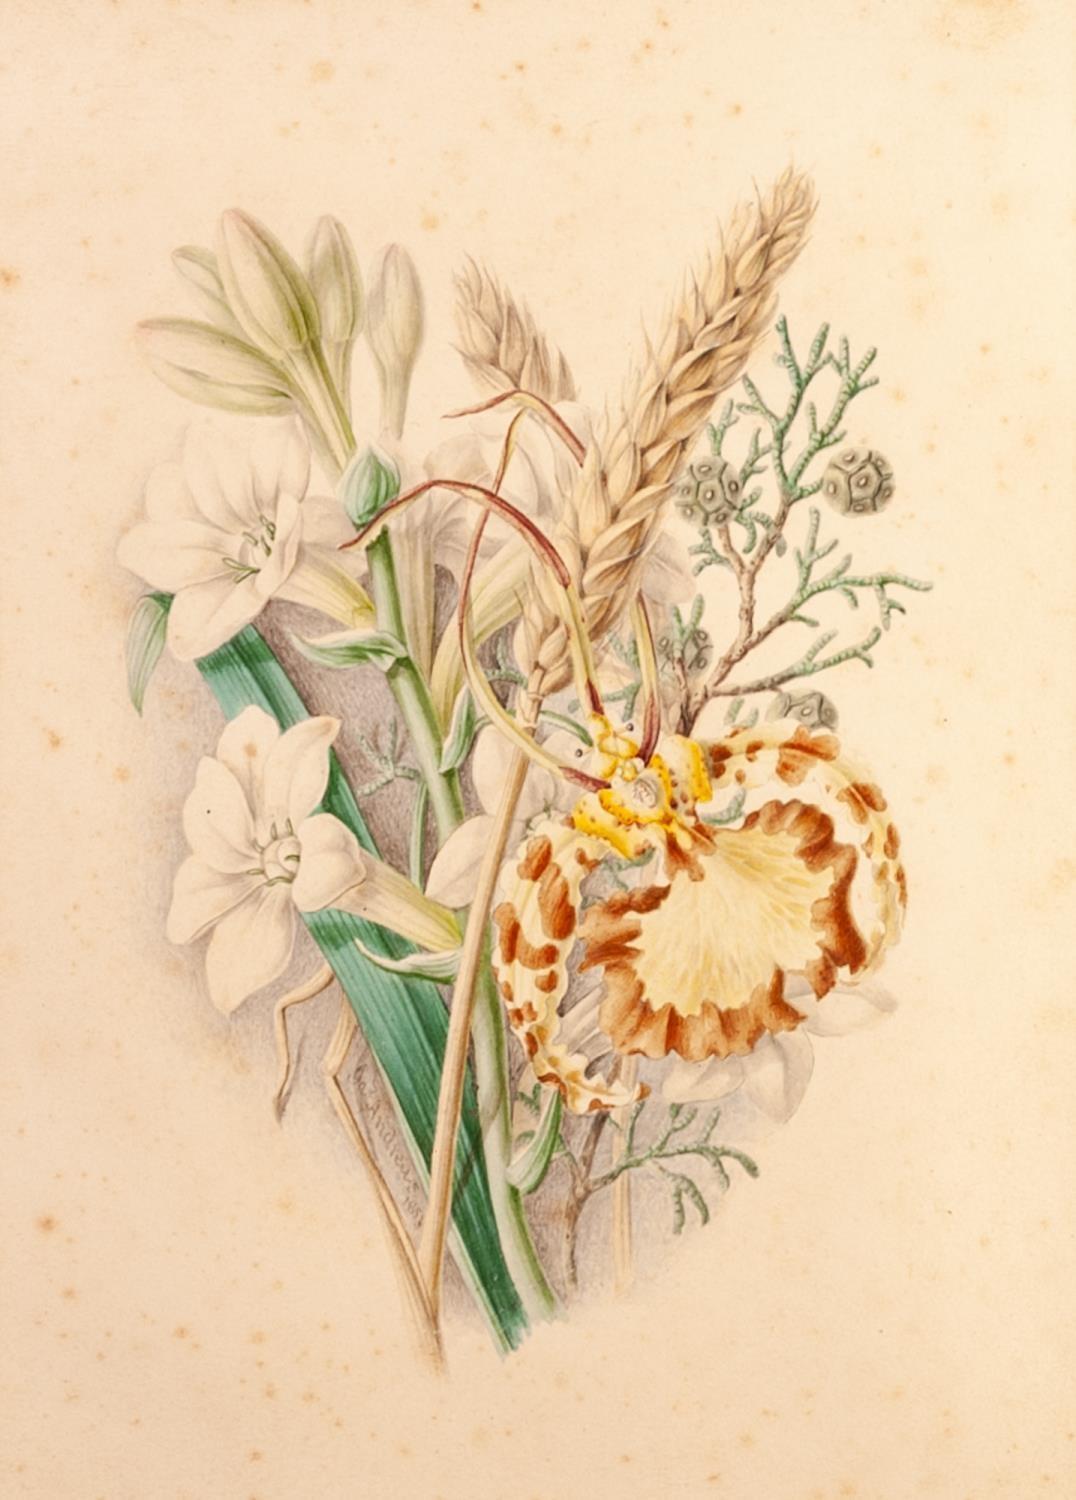 JAMES ANDREWS (NINETEENTH CENTURY) PAIR OF WATERCOLOUR DRAWINGS Floral studies Signed and dated 1853 - Image 2 of 2